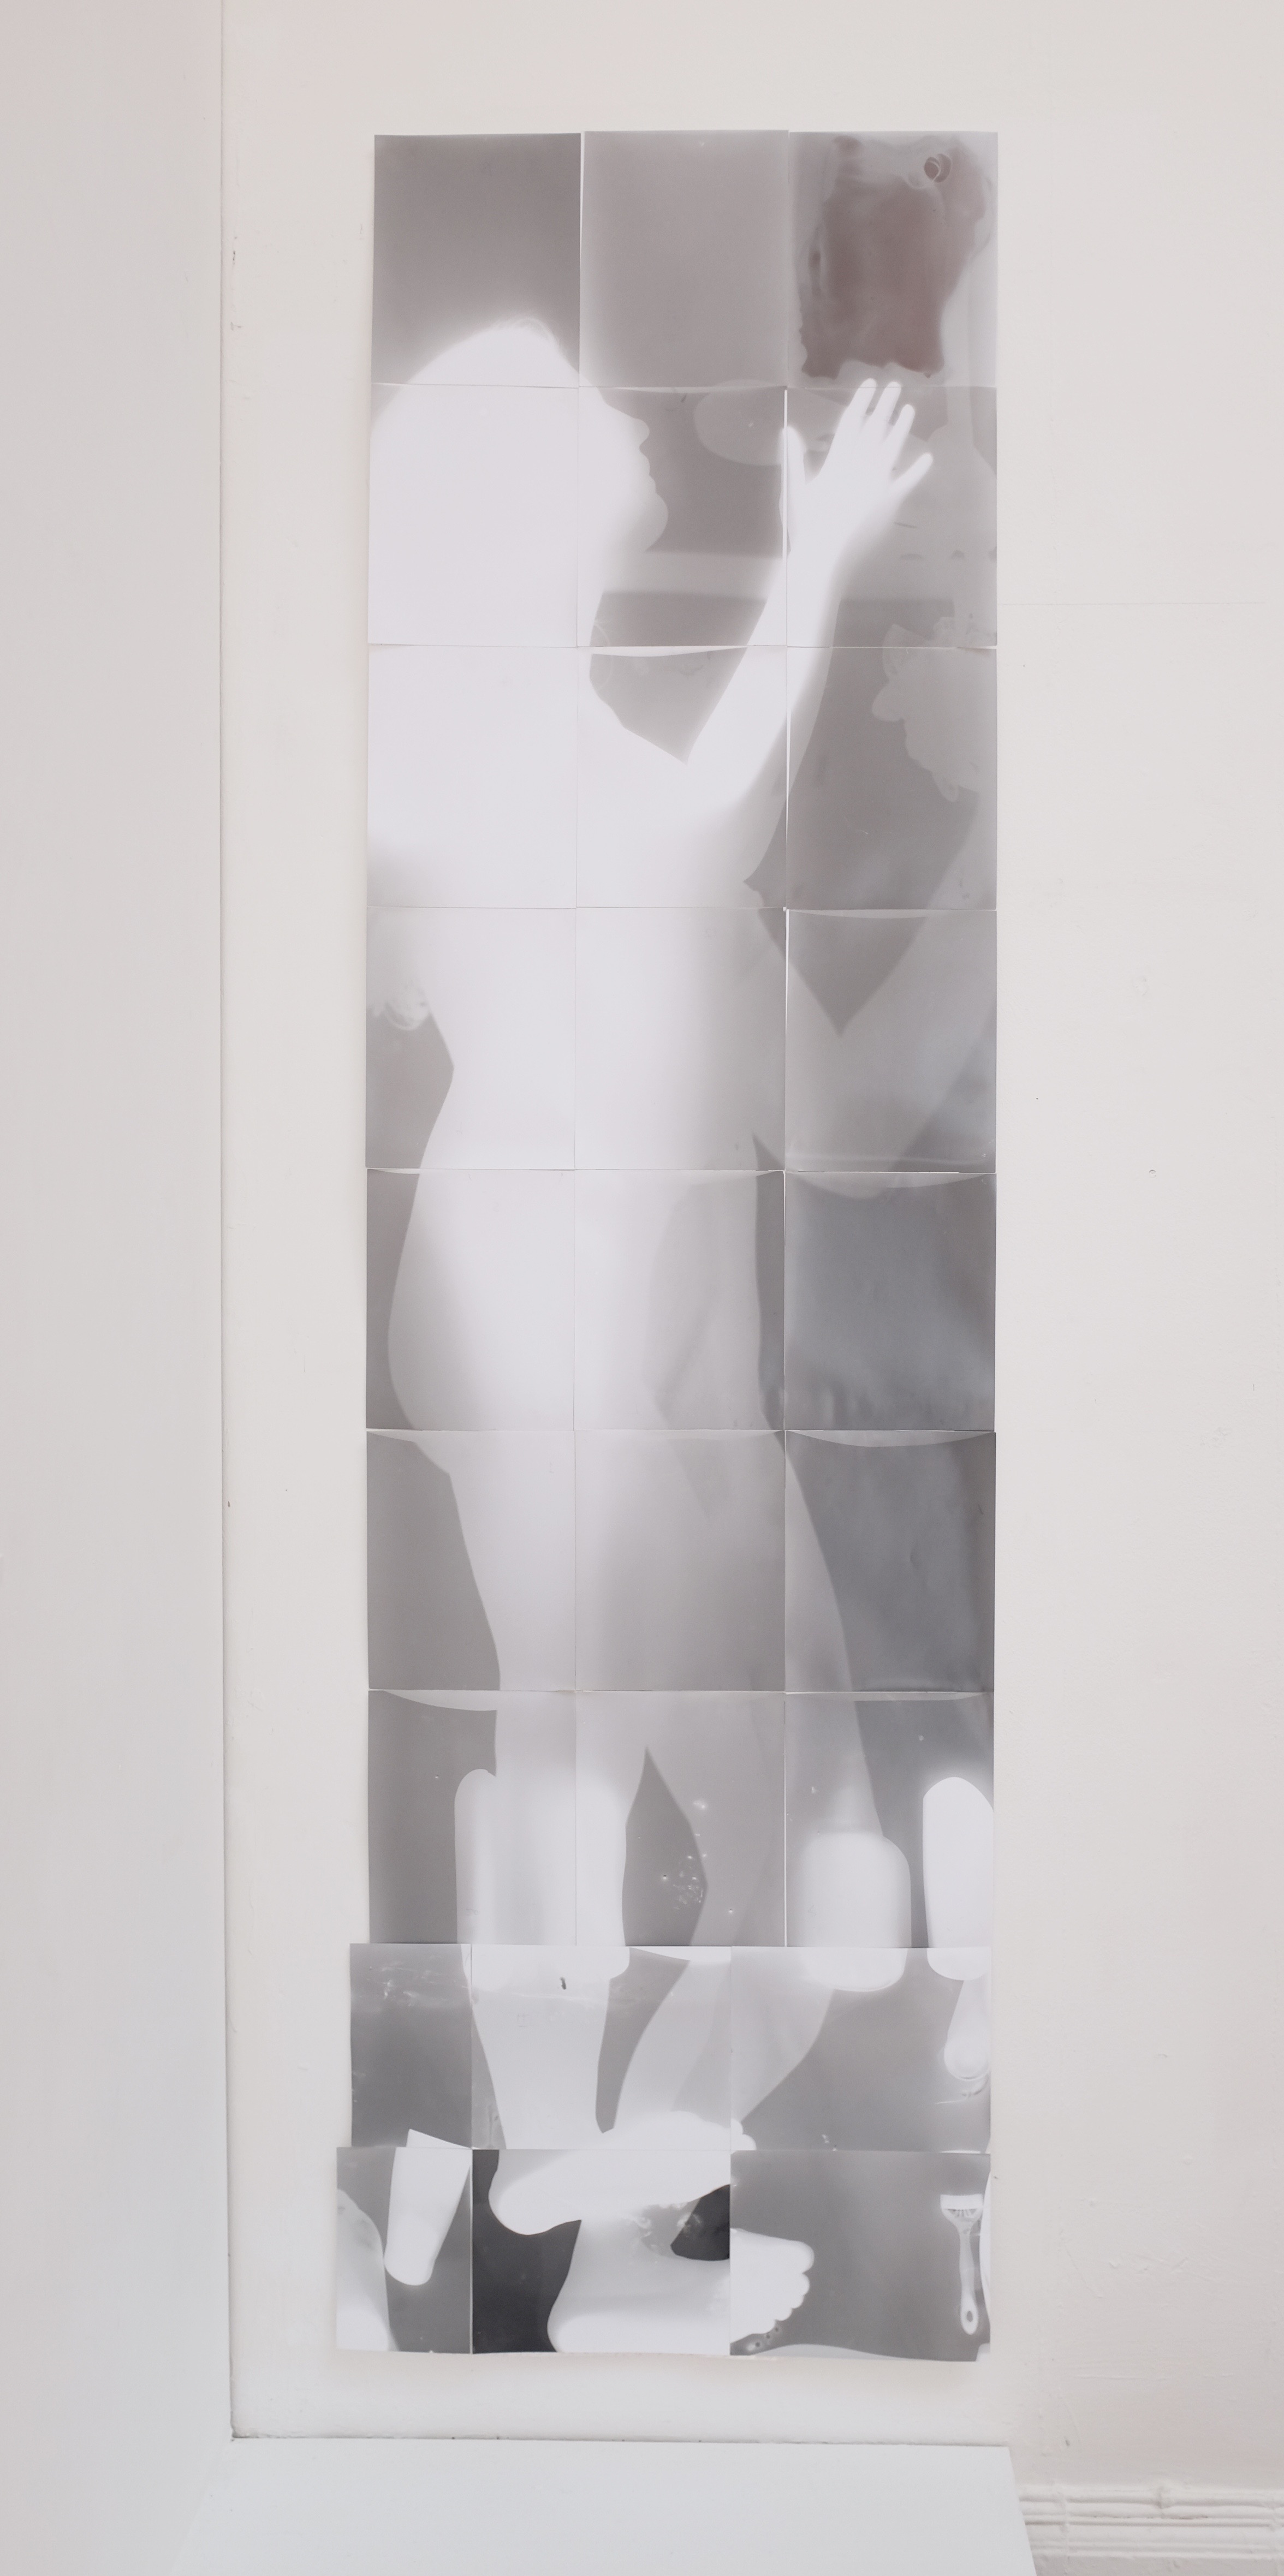  Photogram 7ft approx, resin paper tiled, made entirely in the bathroom darkroom 